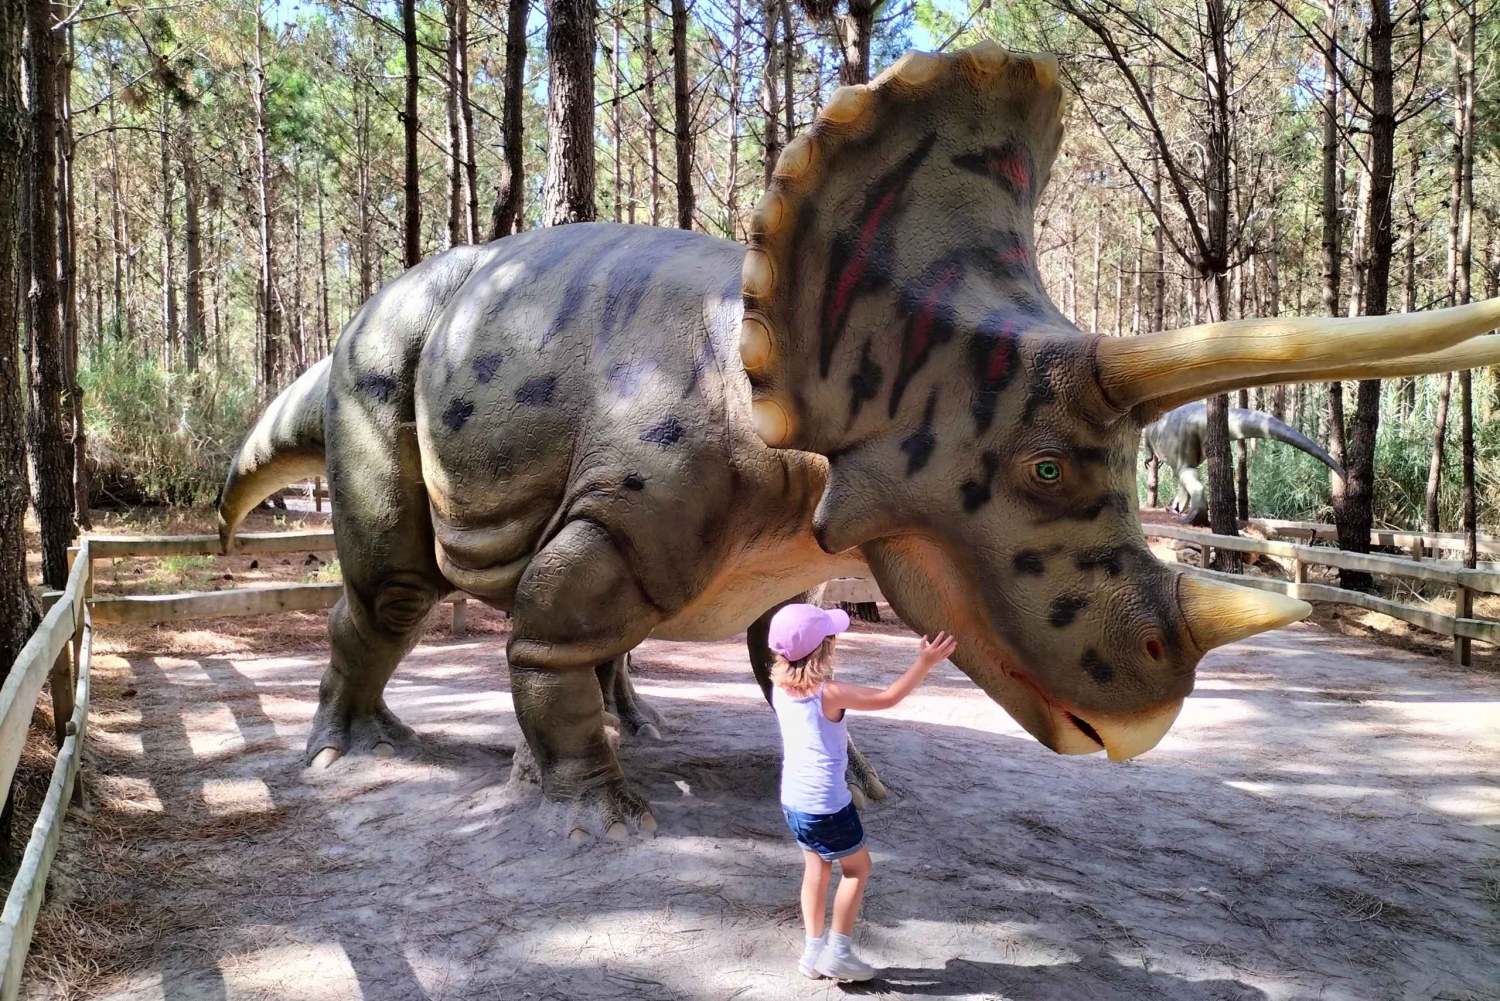 From Lisbon: Trip to Dinosaurs & Little Portugal Theme Parks